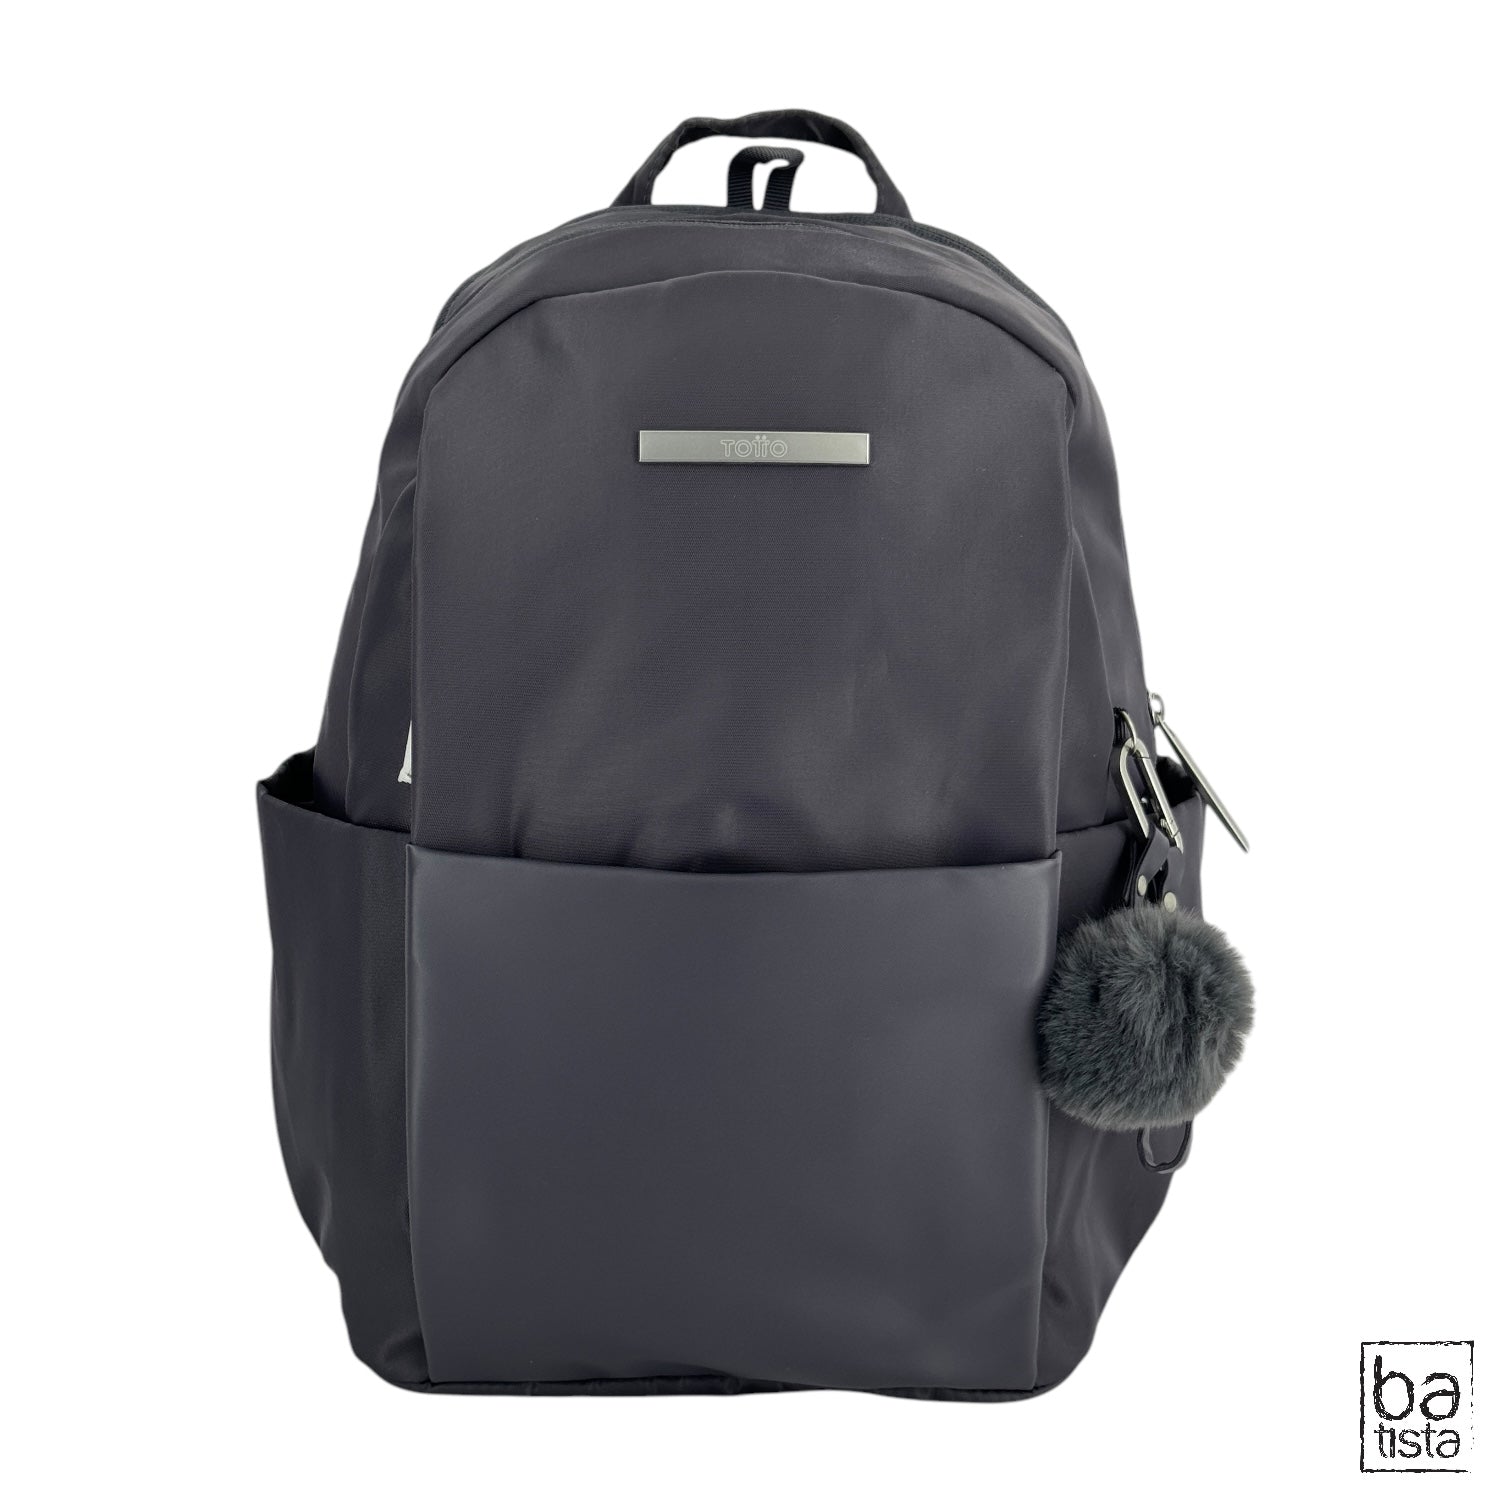 Morral Totto Adelaide 1 2.0 G10 Gris